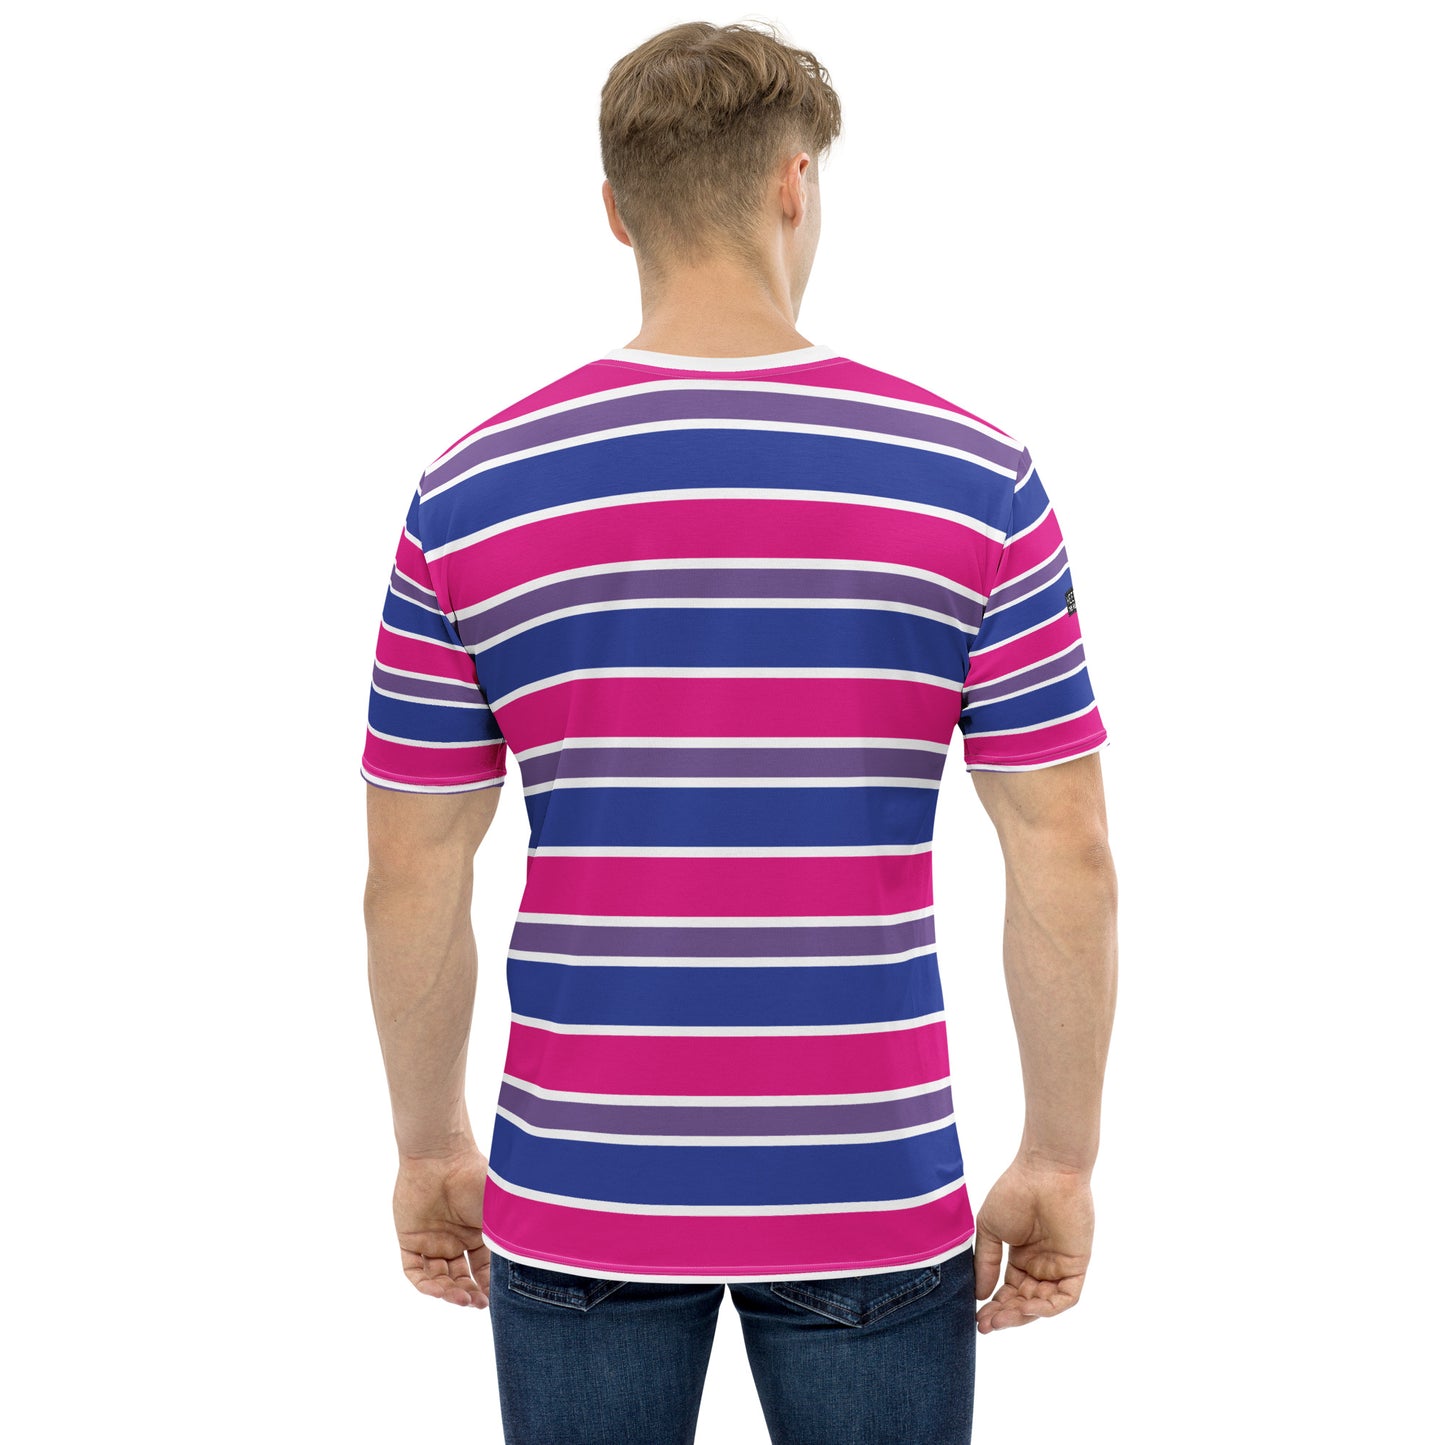 Bisexual Pride Stripes Unisex Cut & Sew All Over Print Tee Shirt